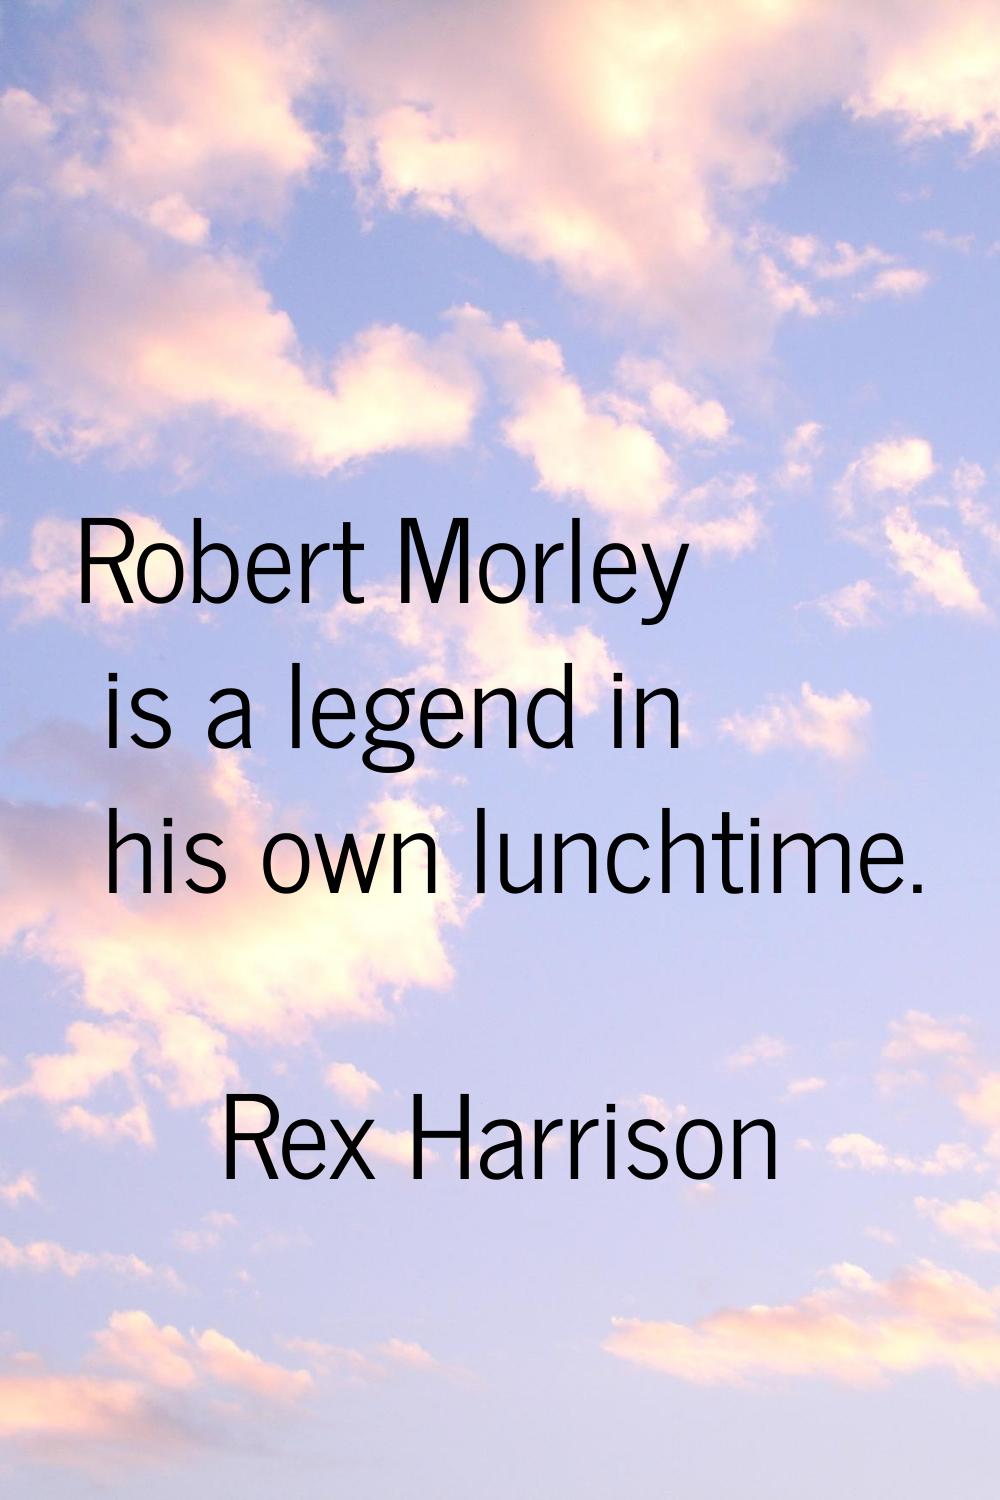 Robert Morley is a legend in his own lunchtime.